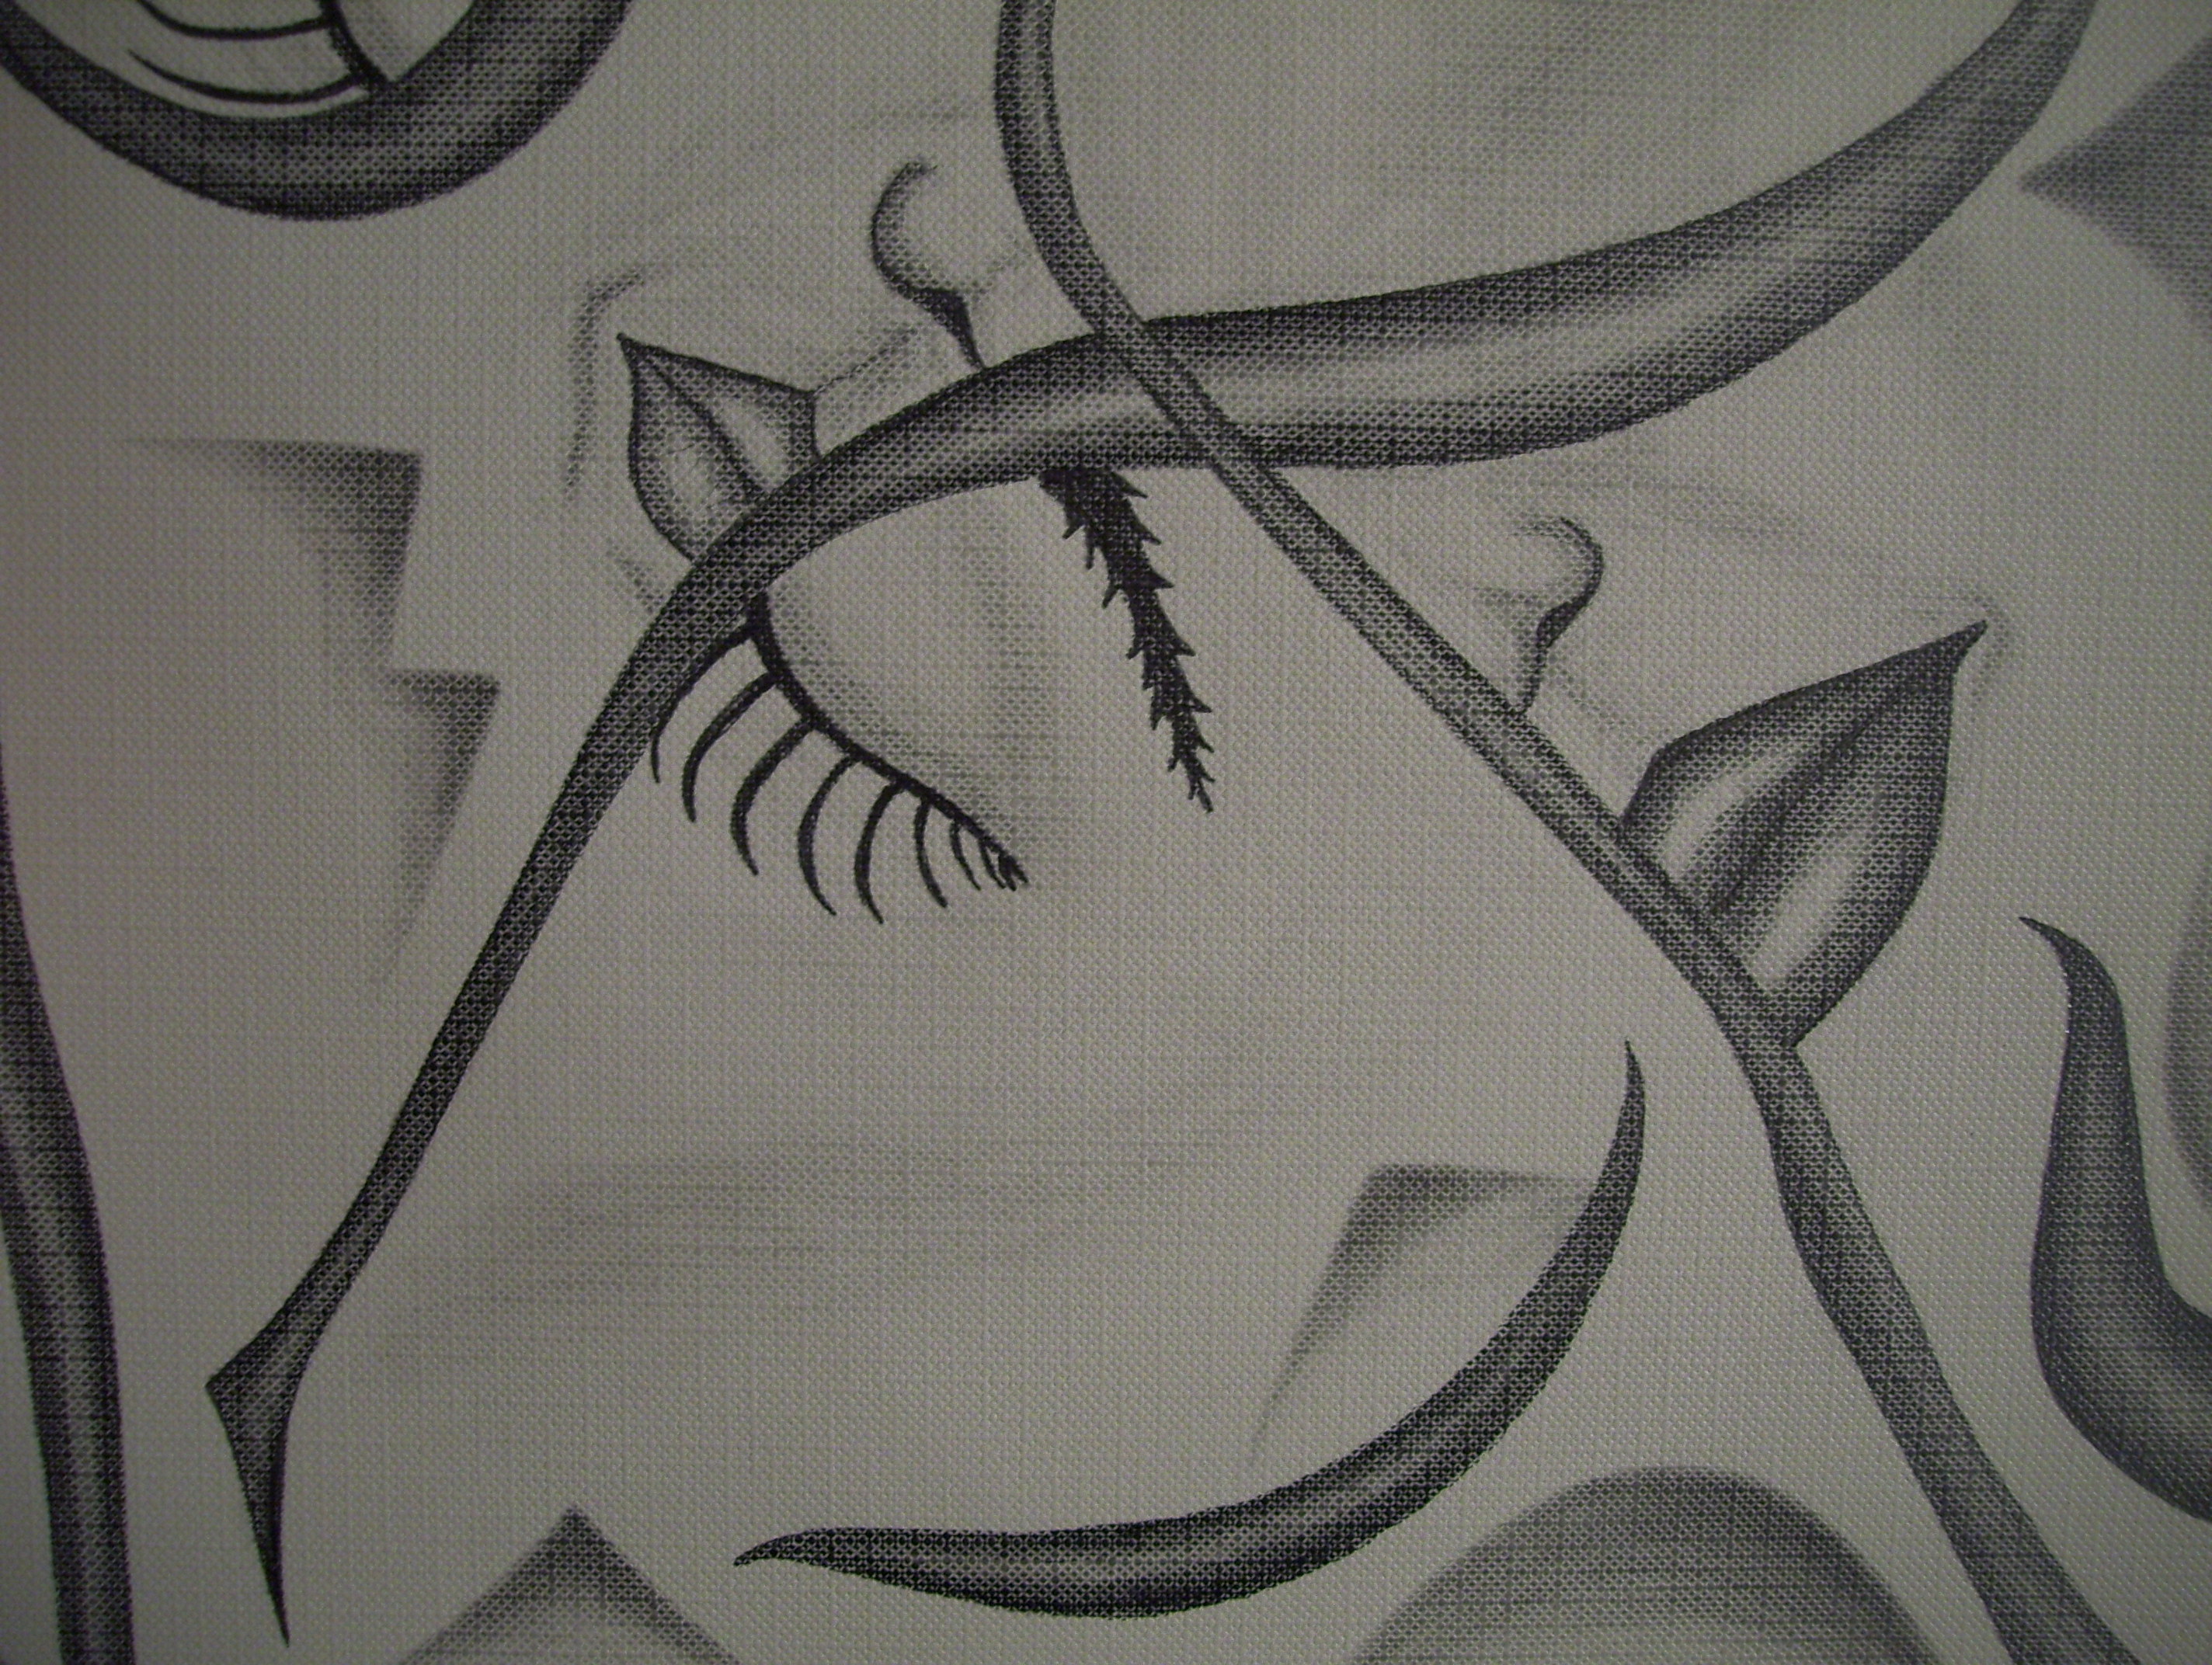 Details more than 133 modern art drawing latest